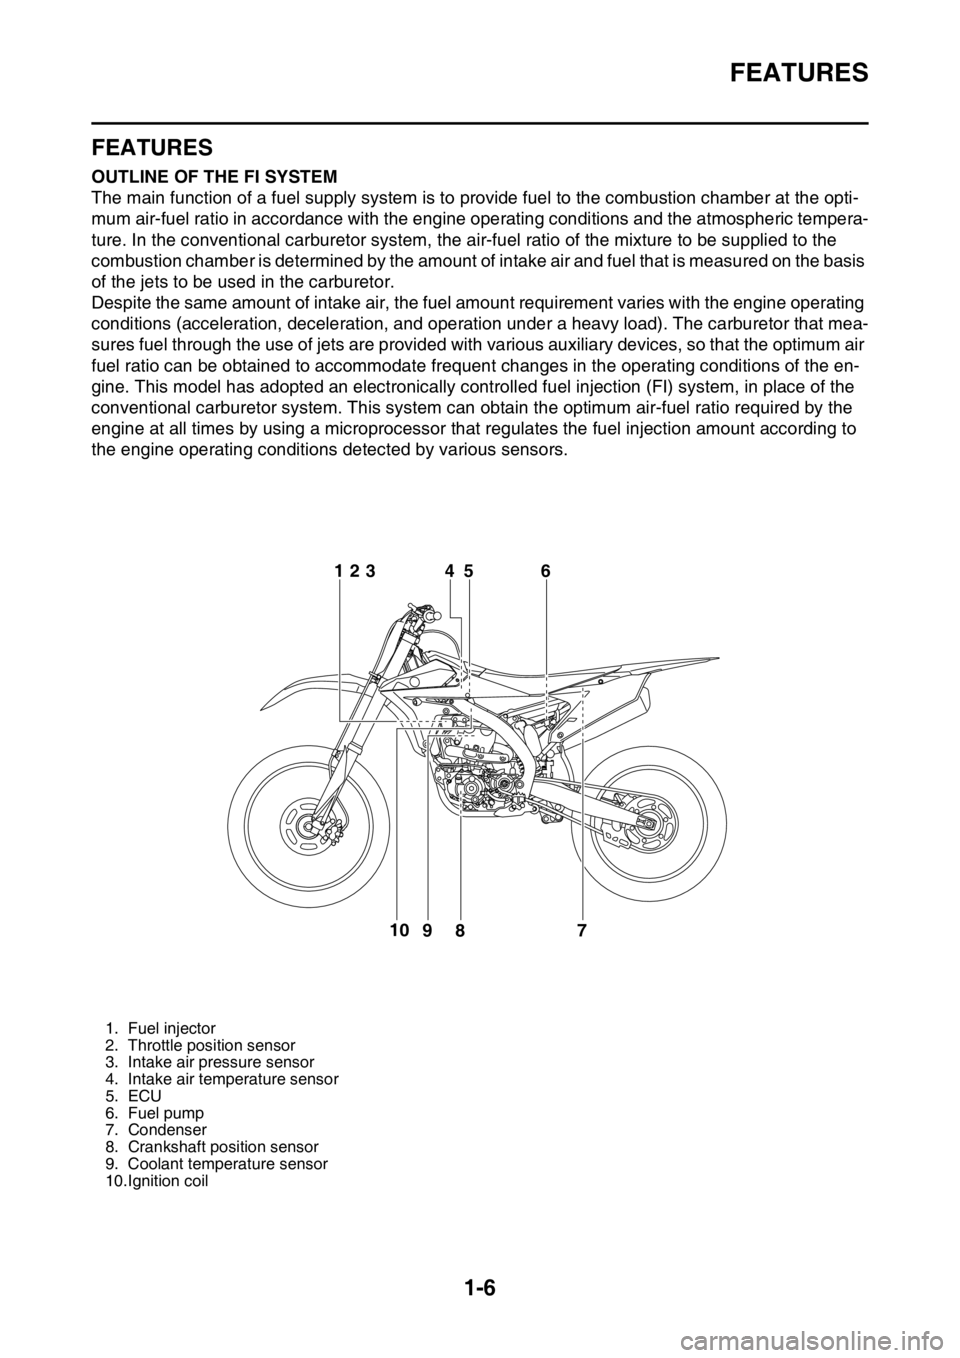 YAMAHA YZ250F 2014  Owners Manual FEATURES
1-6
EAS20170
FEATURESEAS1SM1014OUTLINE OF THE FI SYSTEM
The main function of a fuel supply system is to provide fuel to the combustion chamber at the opti-
mum air-fuel ratio in accordance wi